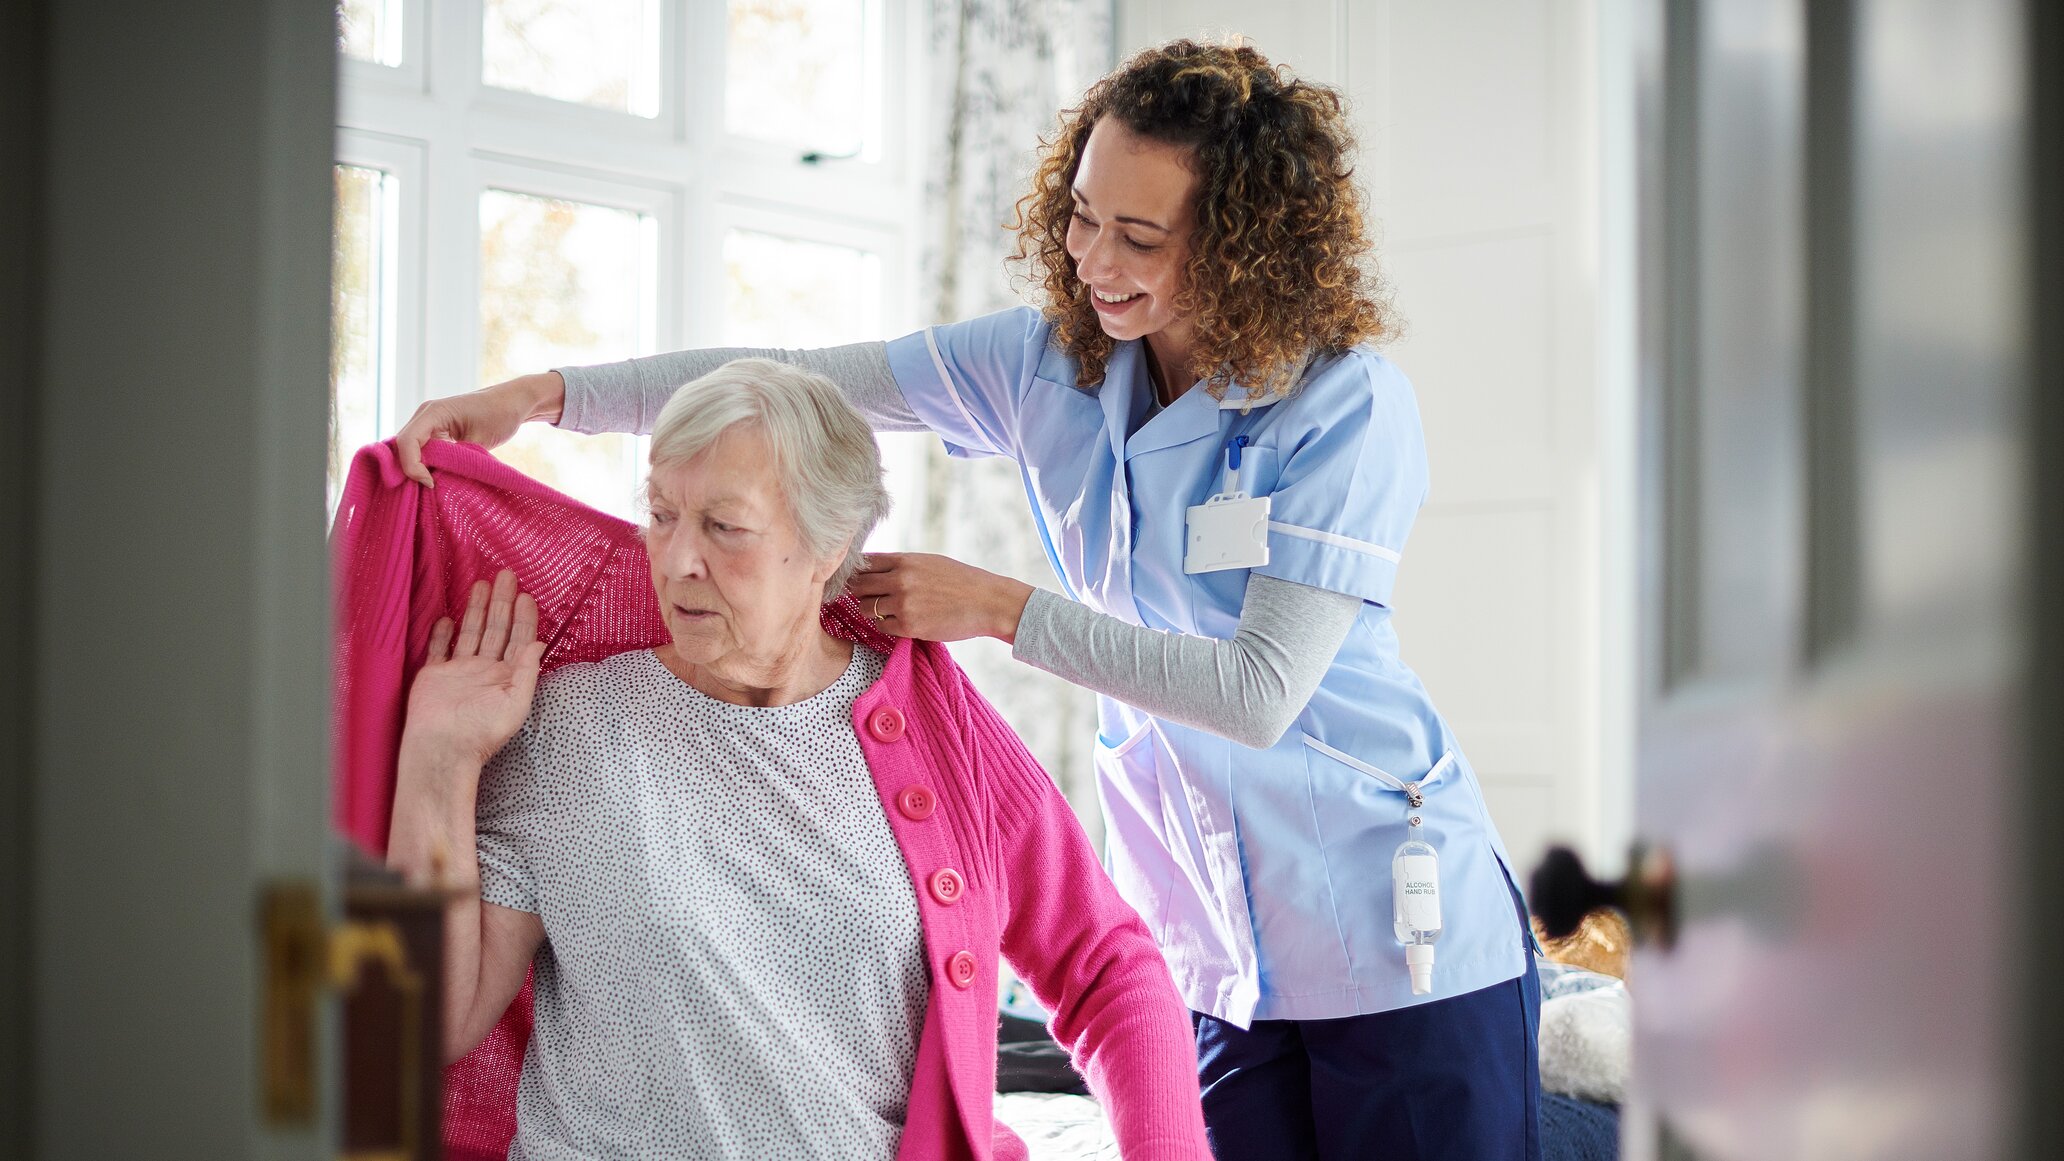 Home Health Aide: The Unseen Hero of Home Care